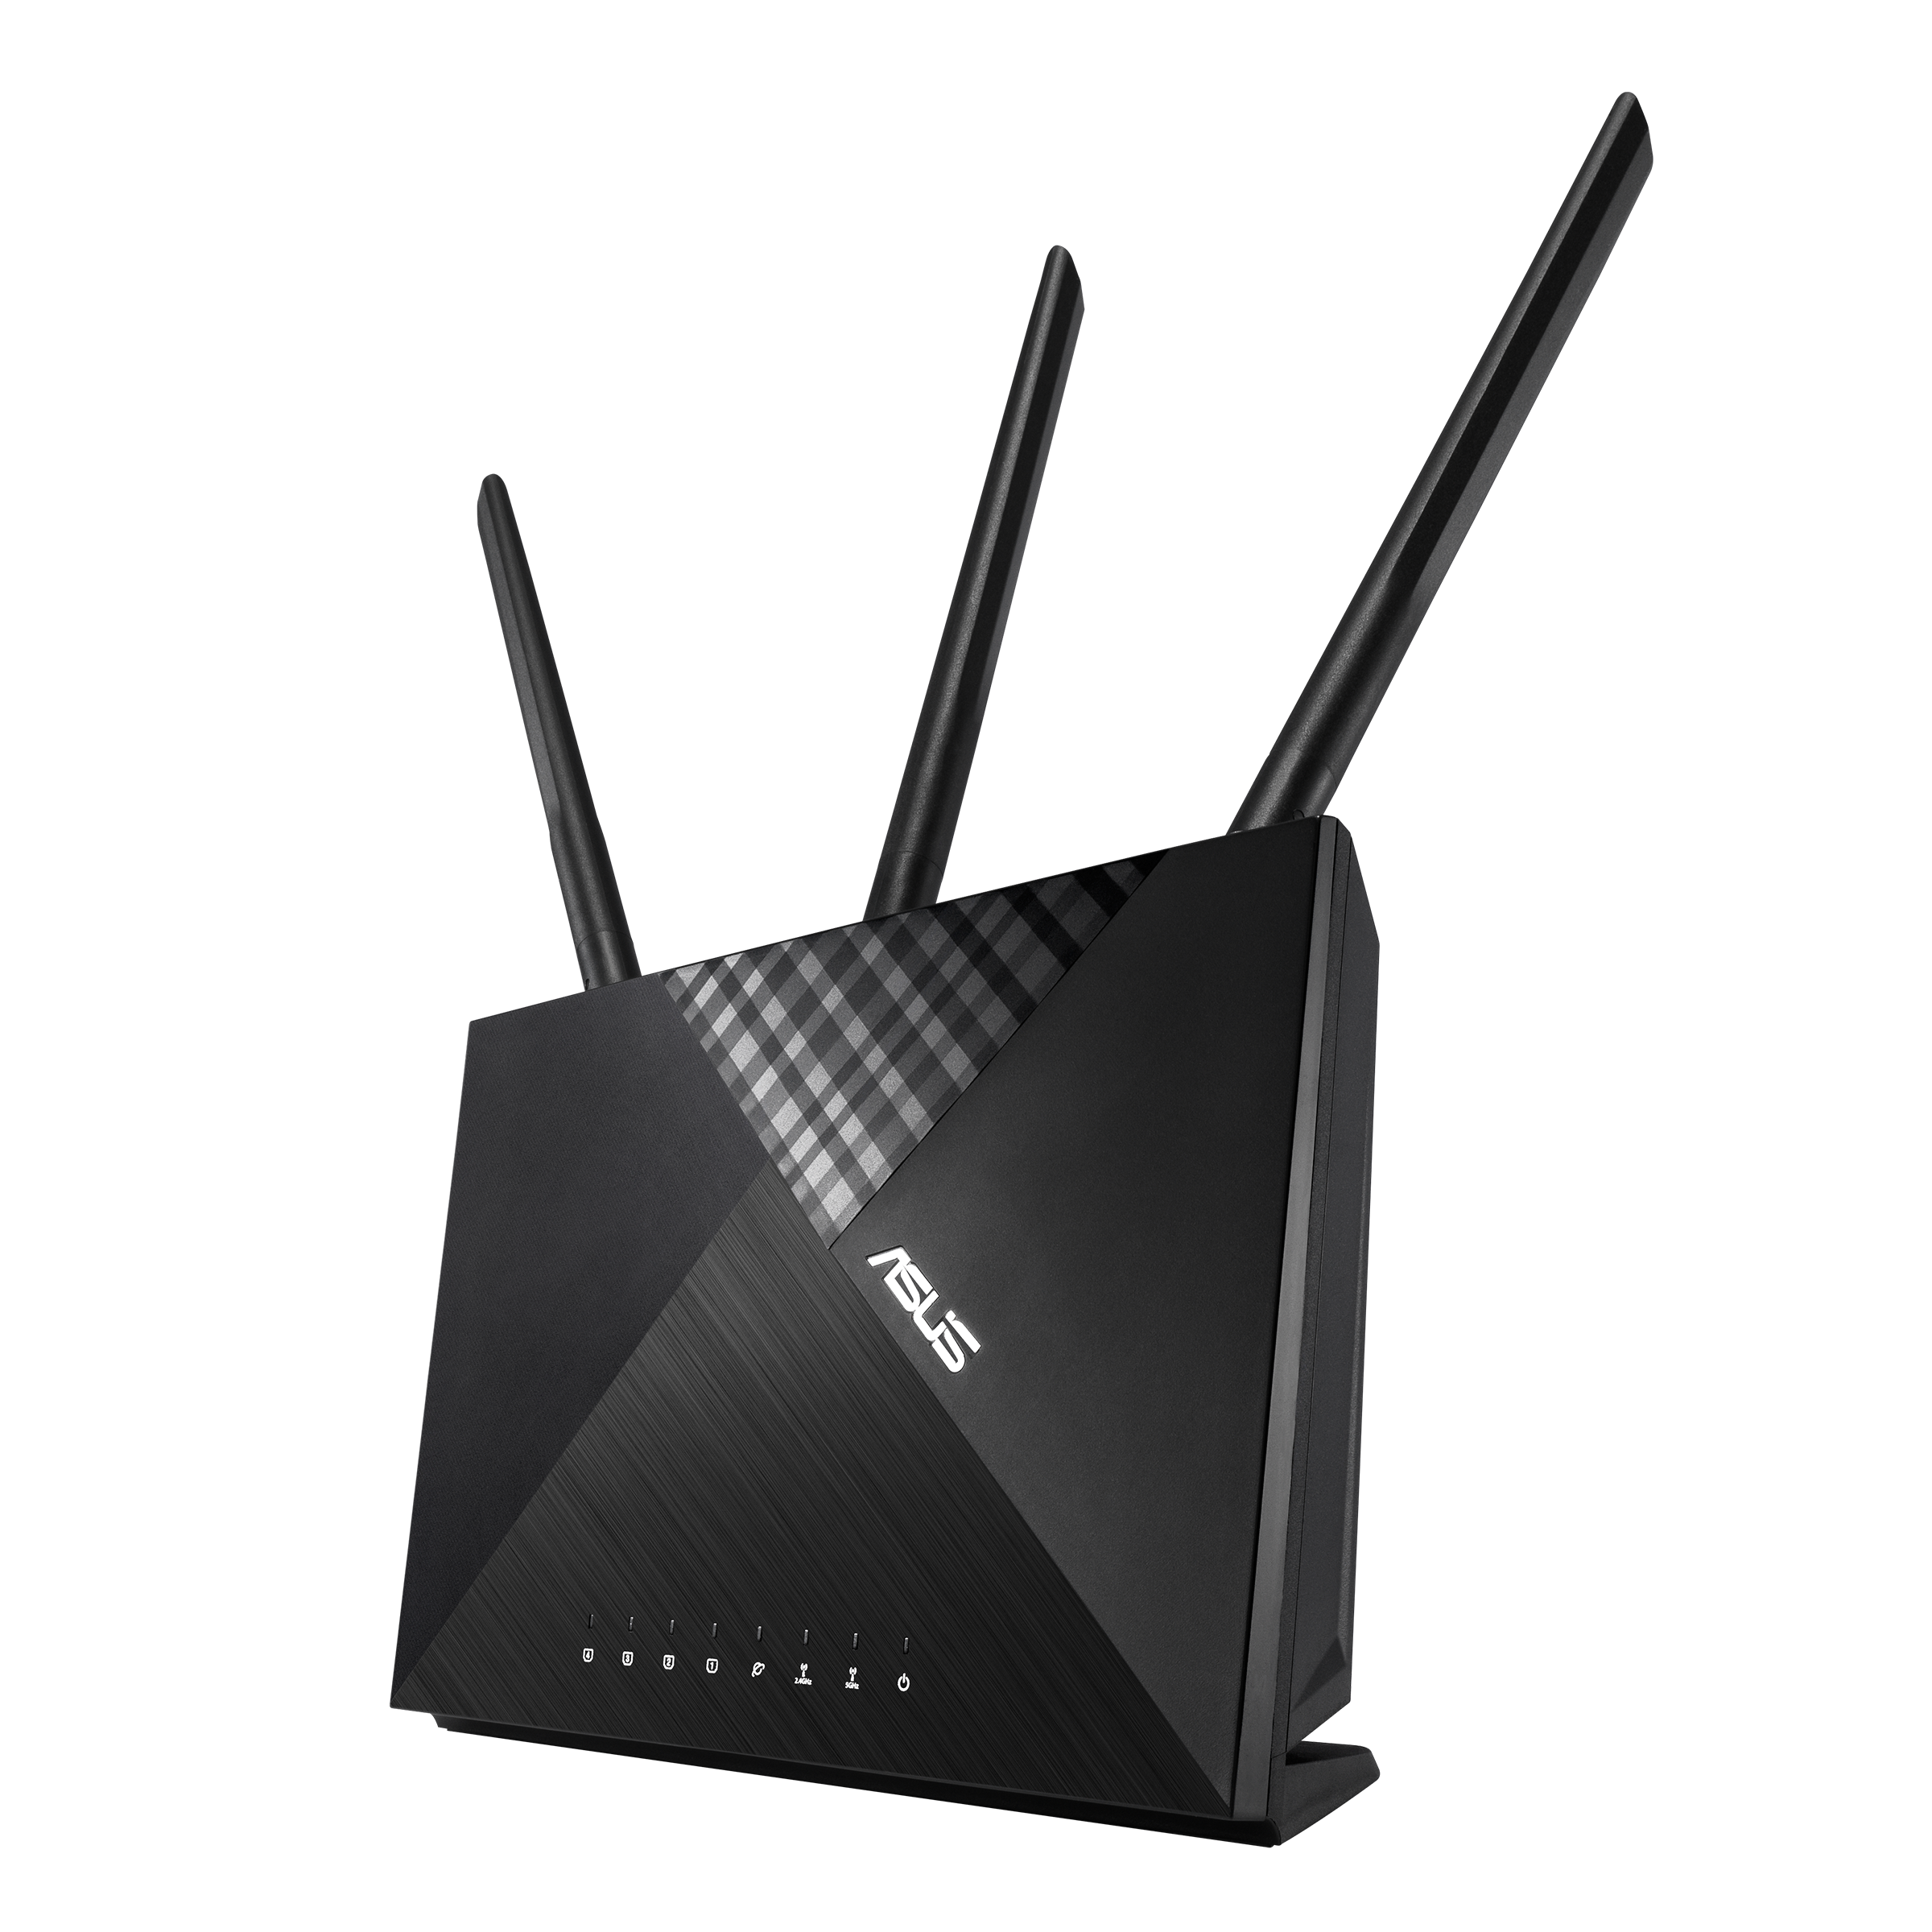 Machu Picchu North lark ASUS AC1750 WiFi Router (RT-AC65) - Dual Band Wireless Internet Router,  Easy Setup, Parental Control, USB 3.0, AiRadar Beamforming Technology  extends Speed, Stability & Coverage, MU-MIMO - Walmart.com